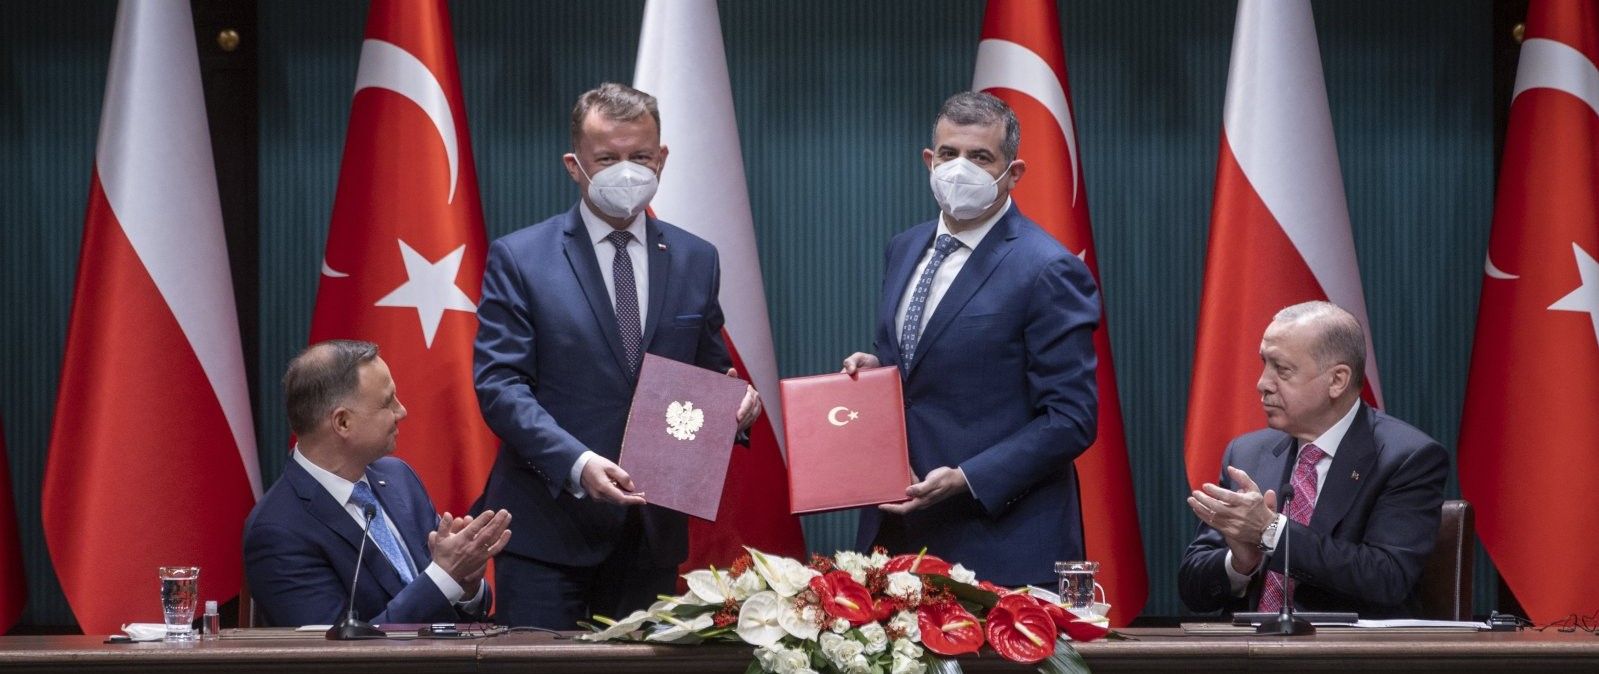 TB2 Agreement signed with Poland